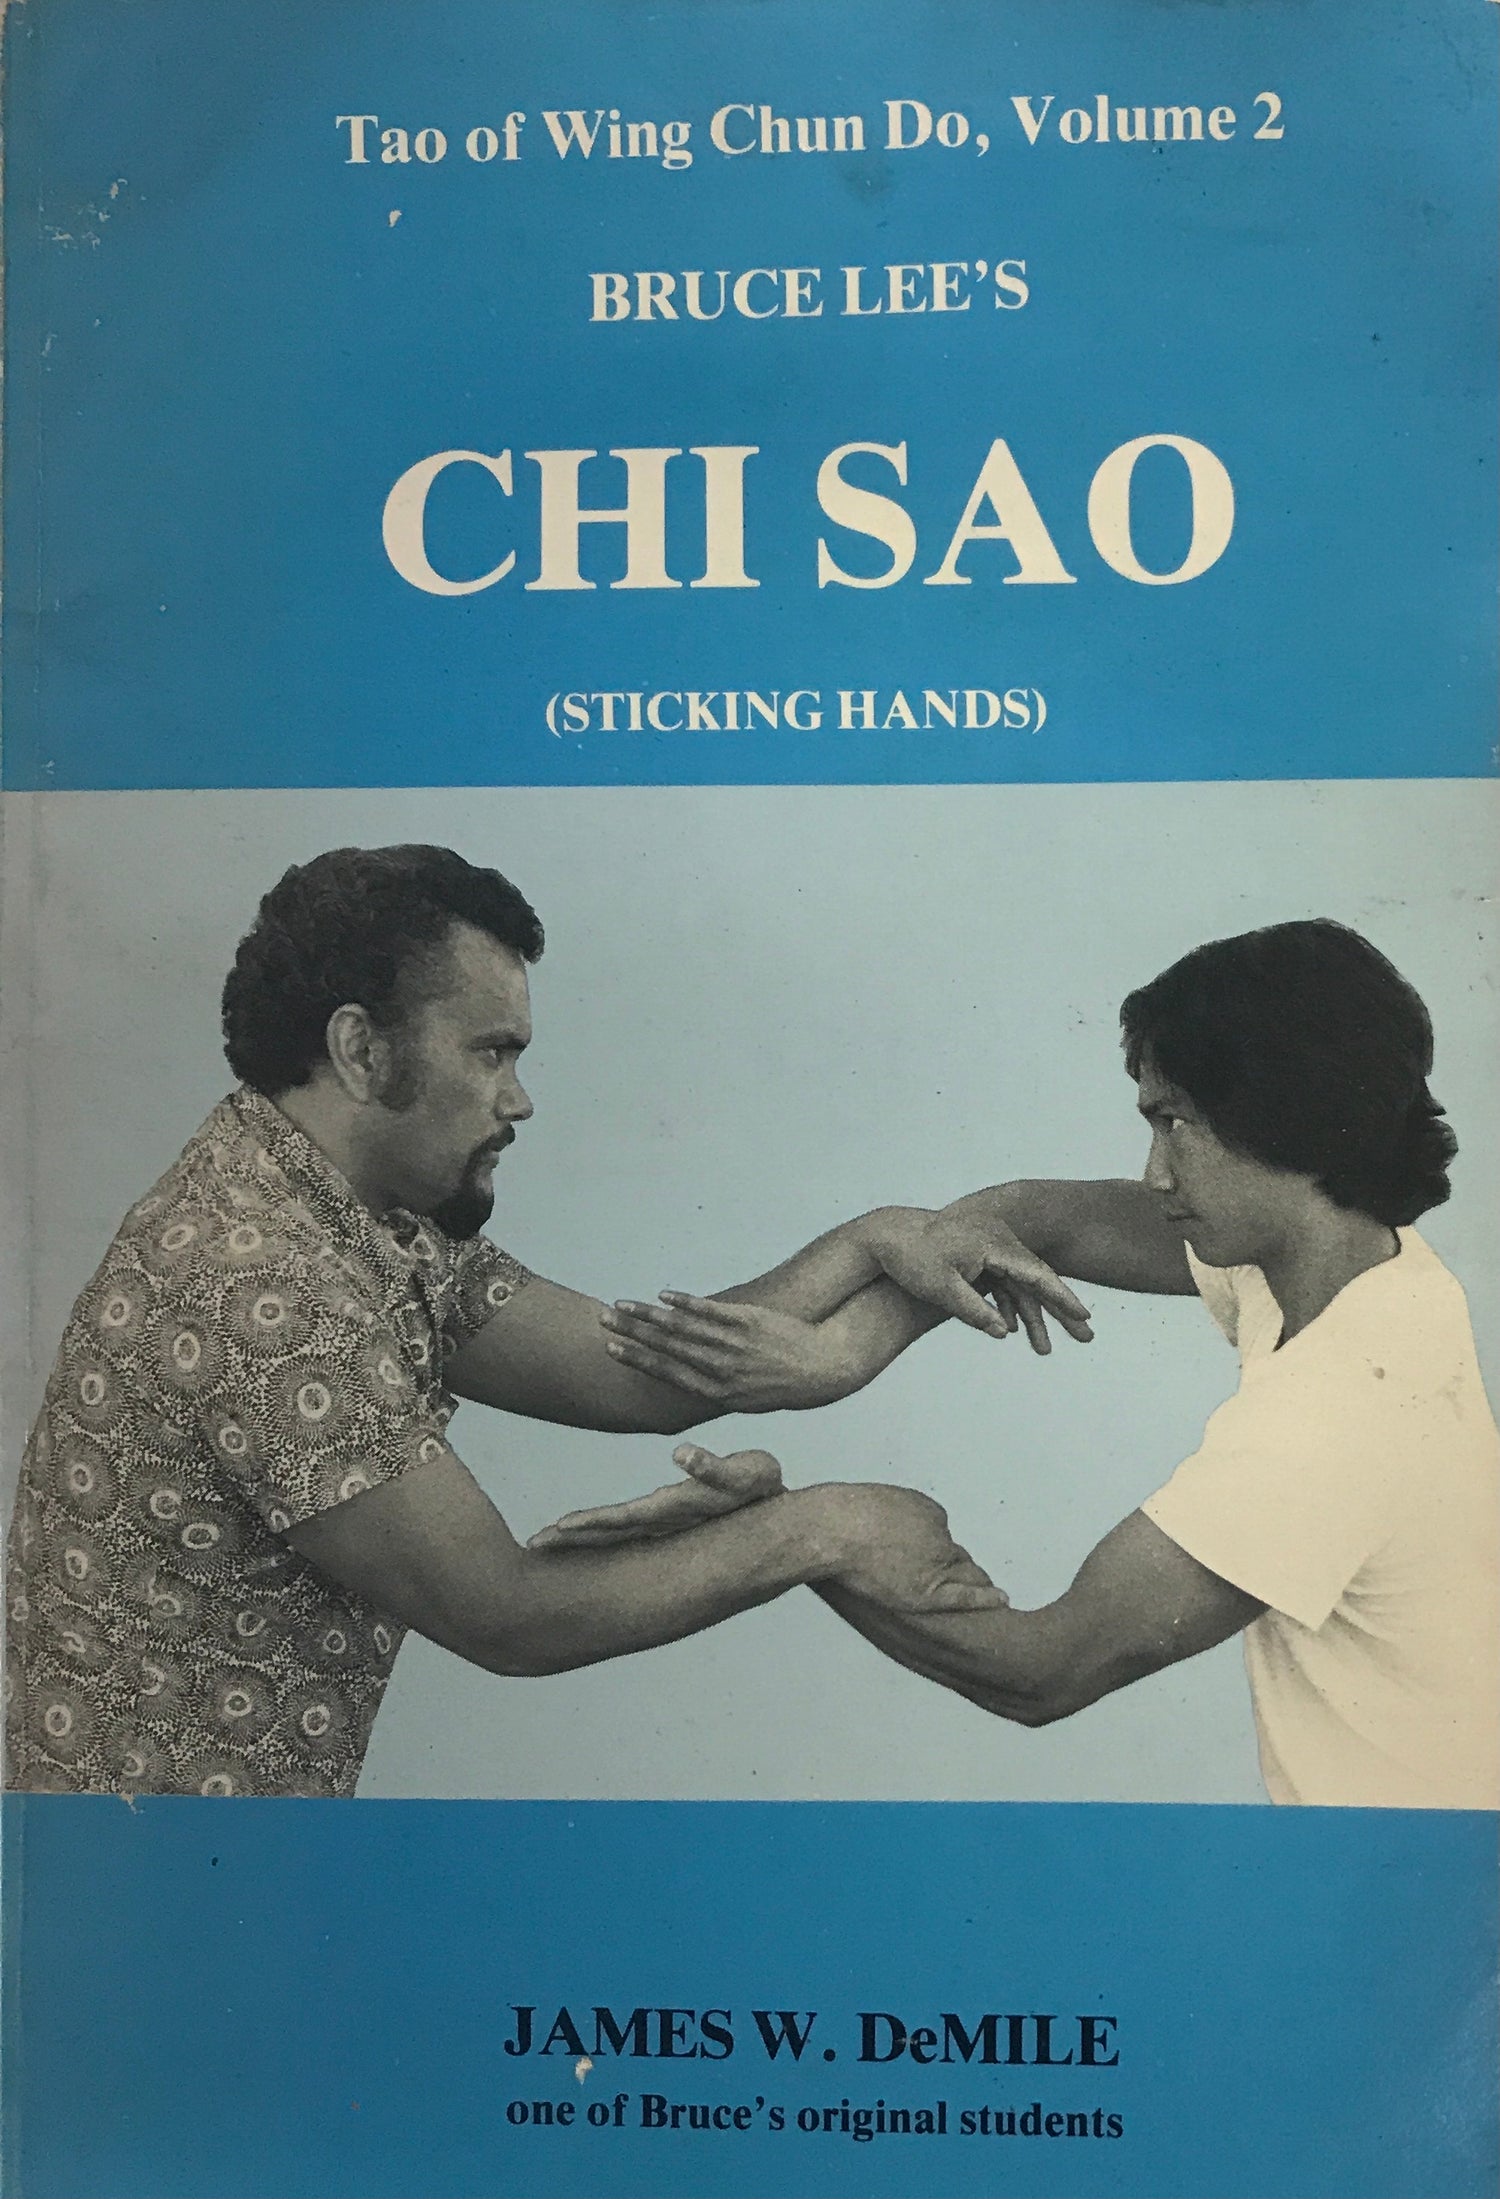 Tao of Wing Chun Do Vol 2: Chi Sao Sticking Hands Book by James DeMile (Preowned) - Budovideos Inc